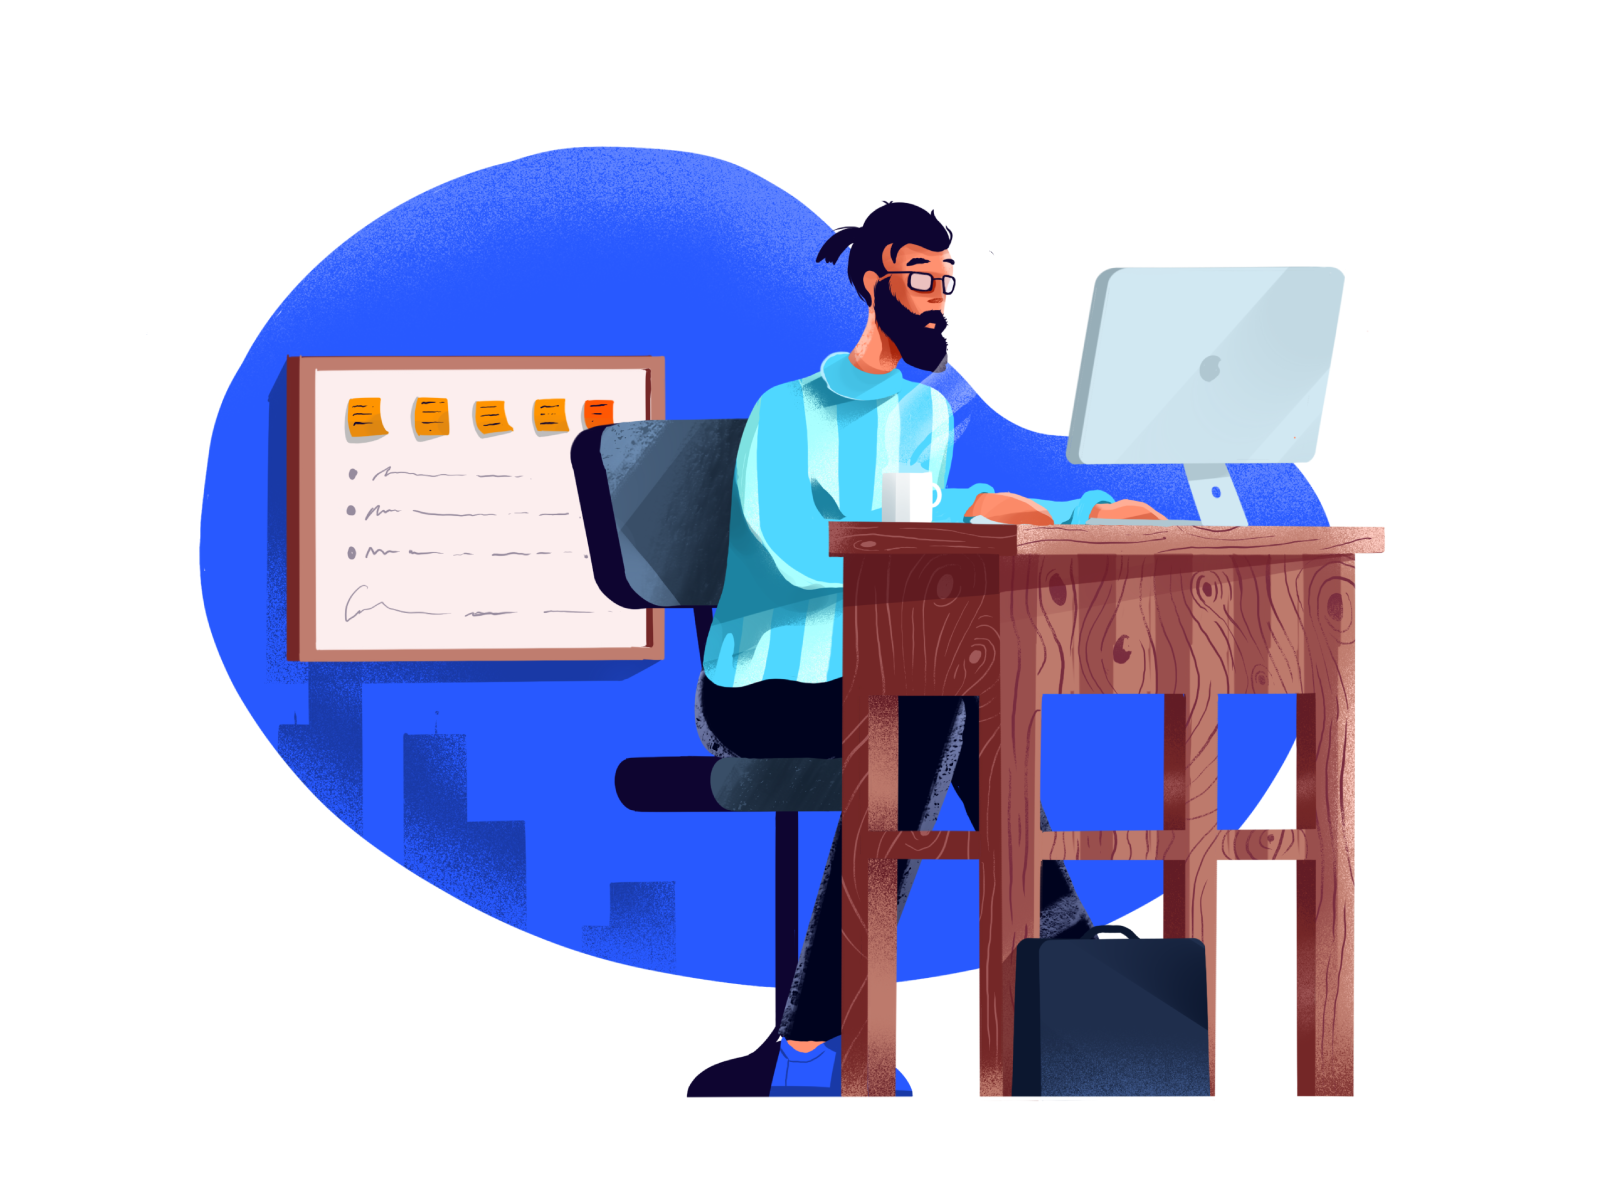 IT illustrations by Rytis Jonikas for Flair on Dribbble